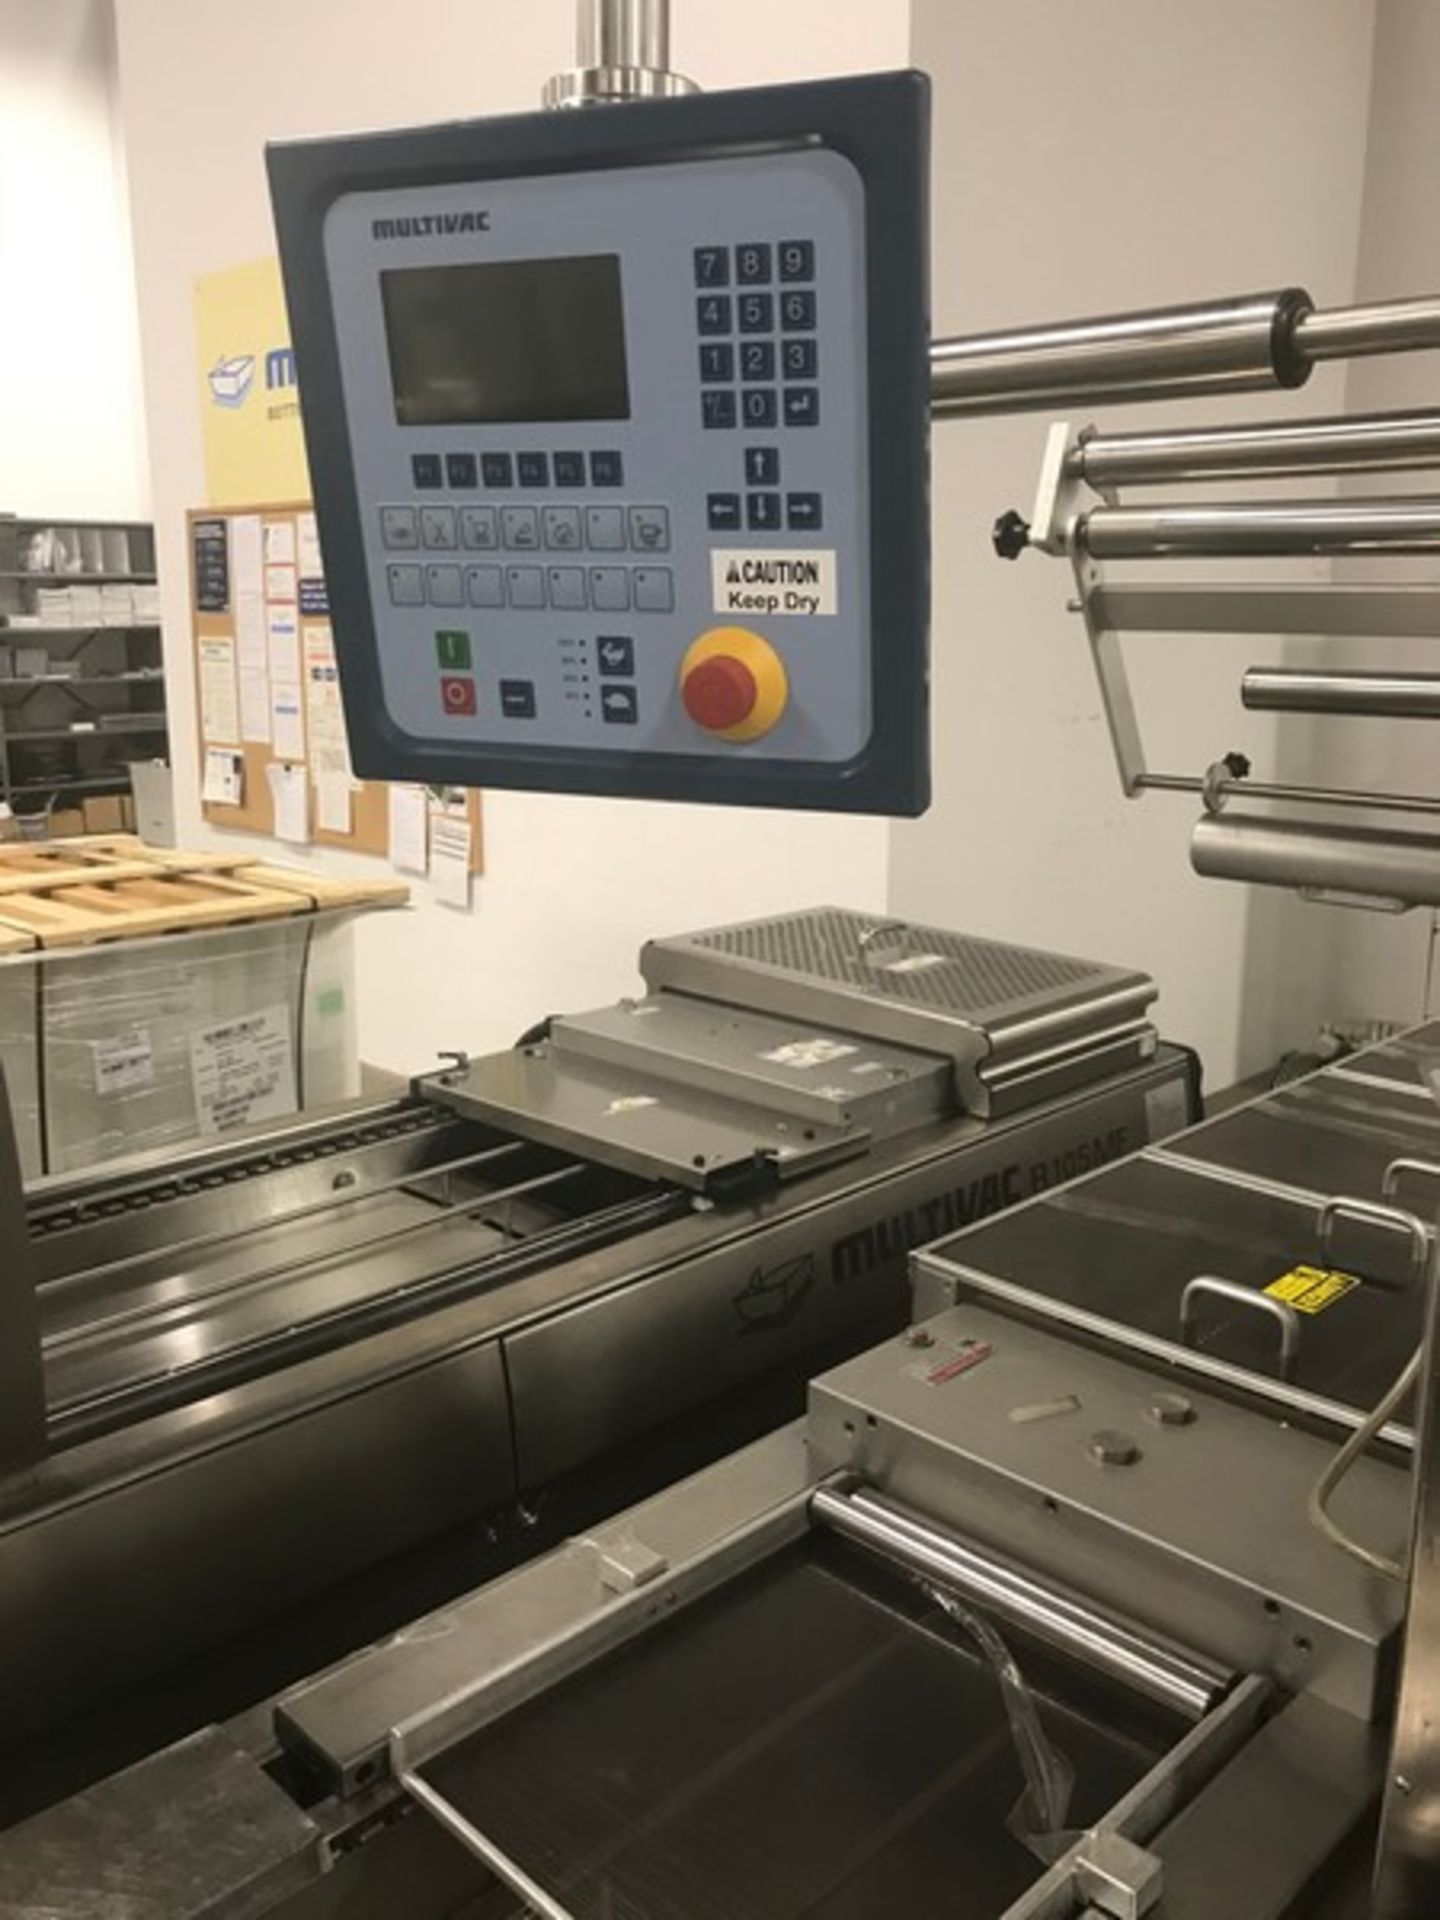 Multivac Vacuum Packaging Machine, Model R230, S/N 810, 220 V/60 Hz (1999) (Unit #96) (Located New - Image 3 of 7